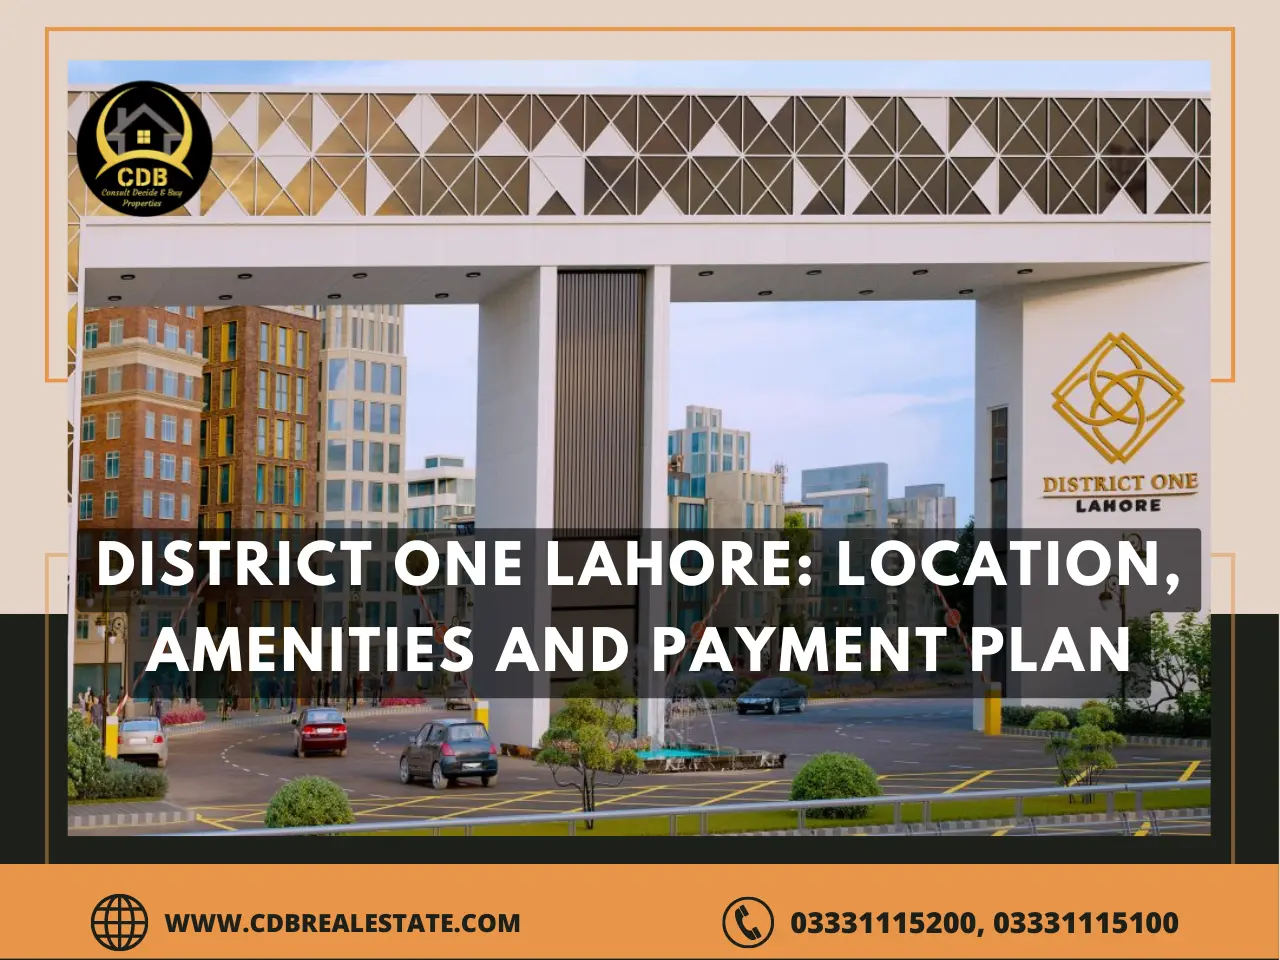 District One Lahore Location, Amenities and Payment Plan